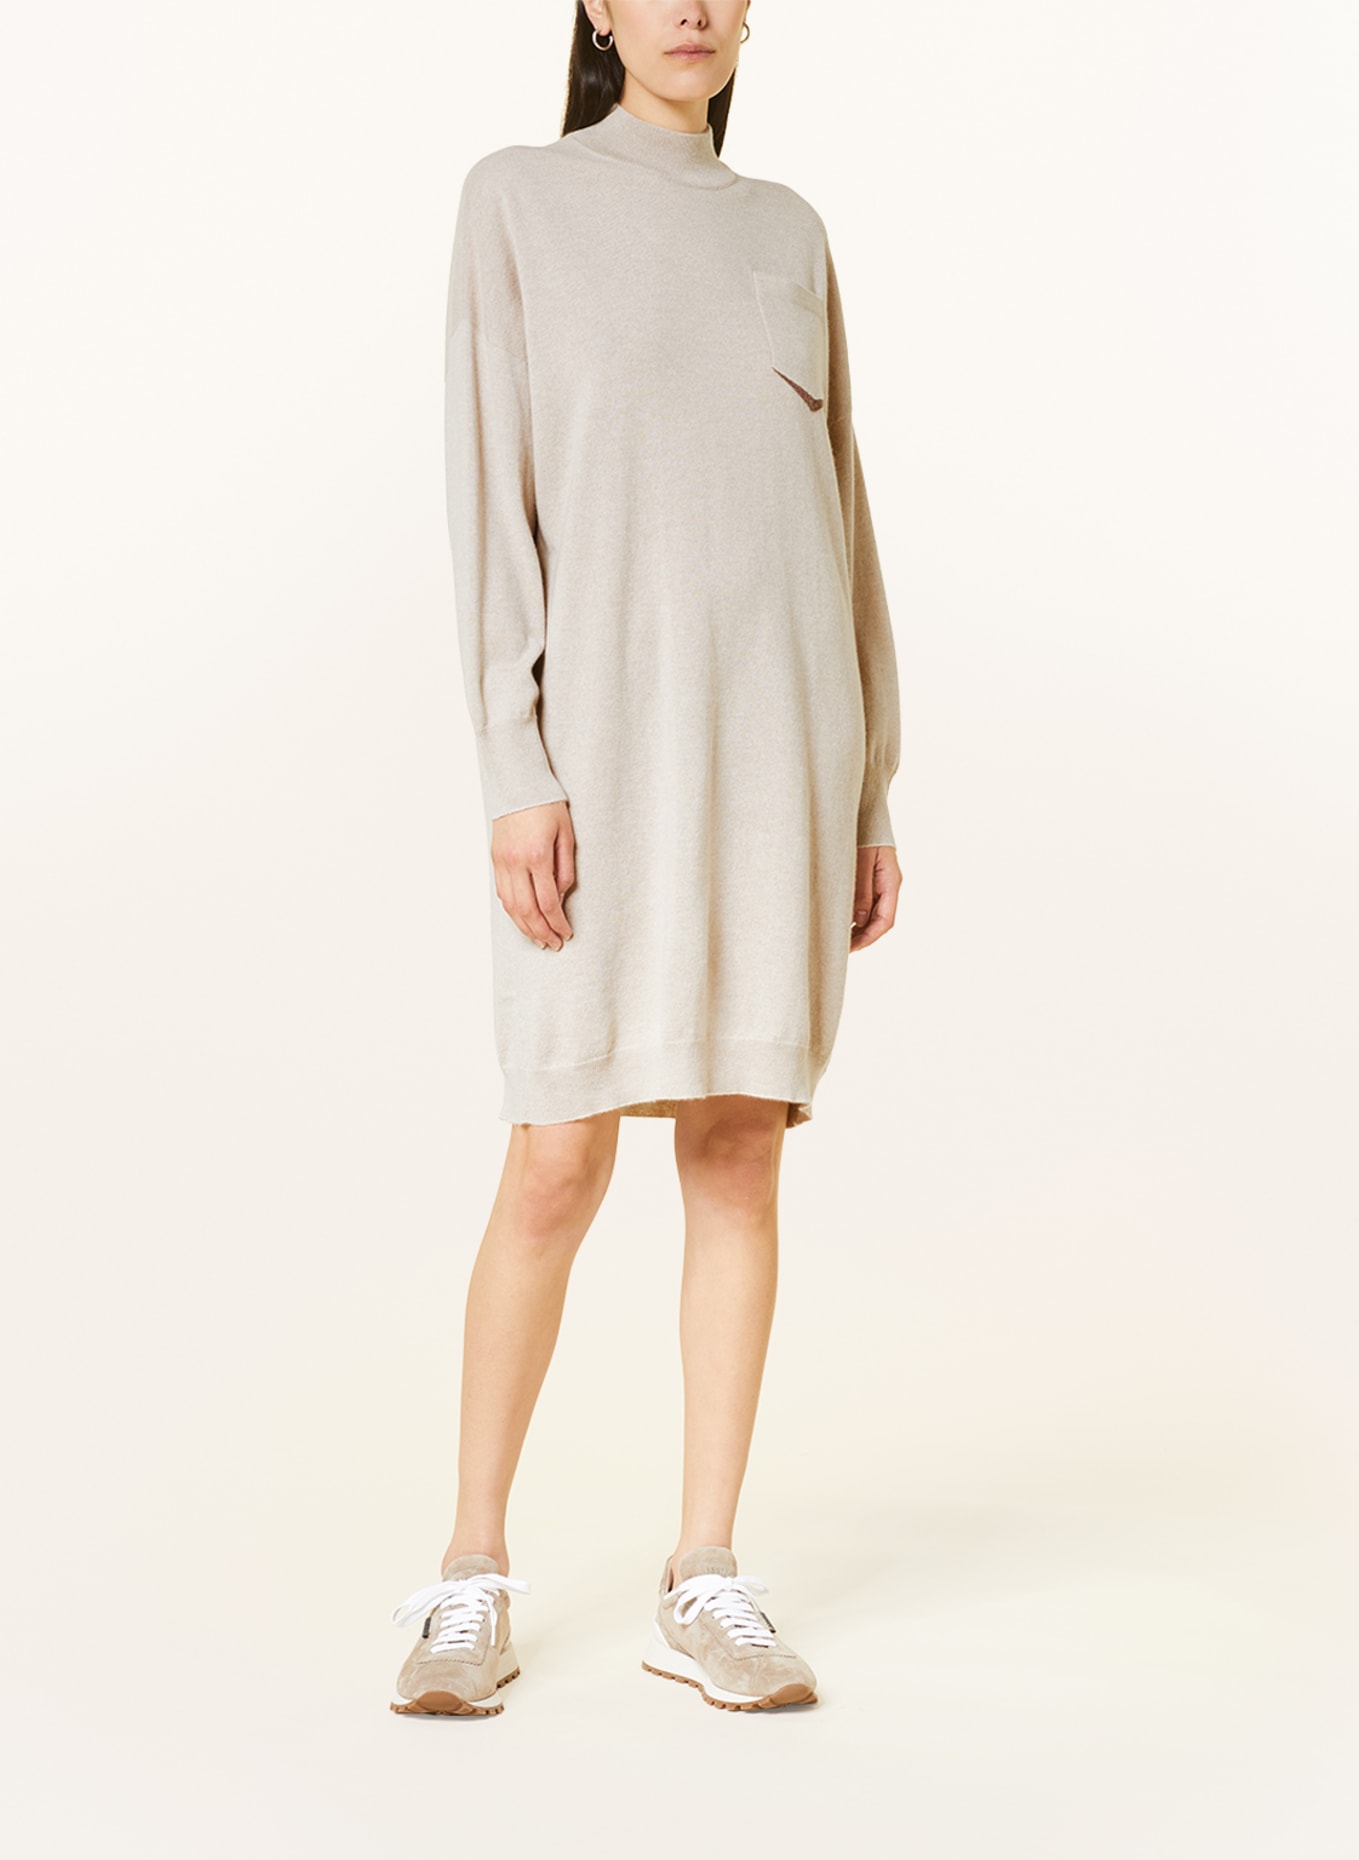 BRUNELLO CUCINELLI Knit dress made of cashmere with decorative beads, Color: BEIGE (Image 2)